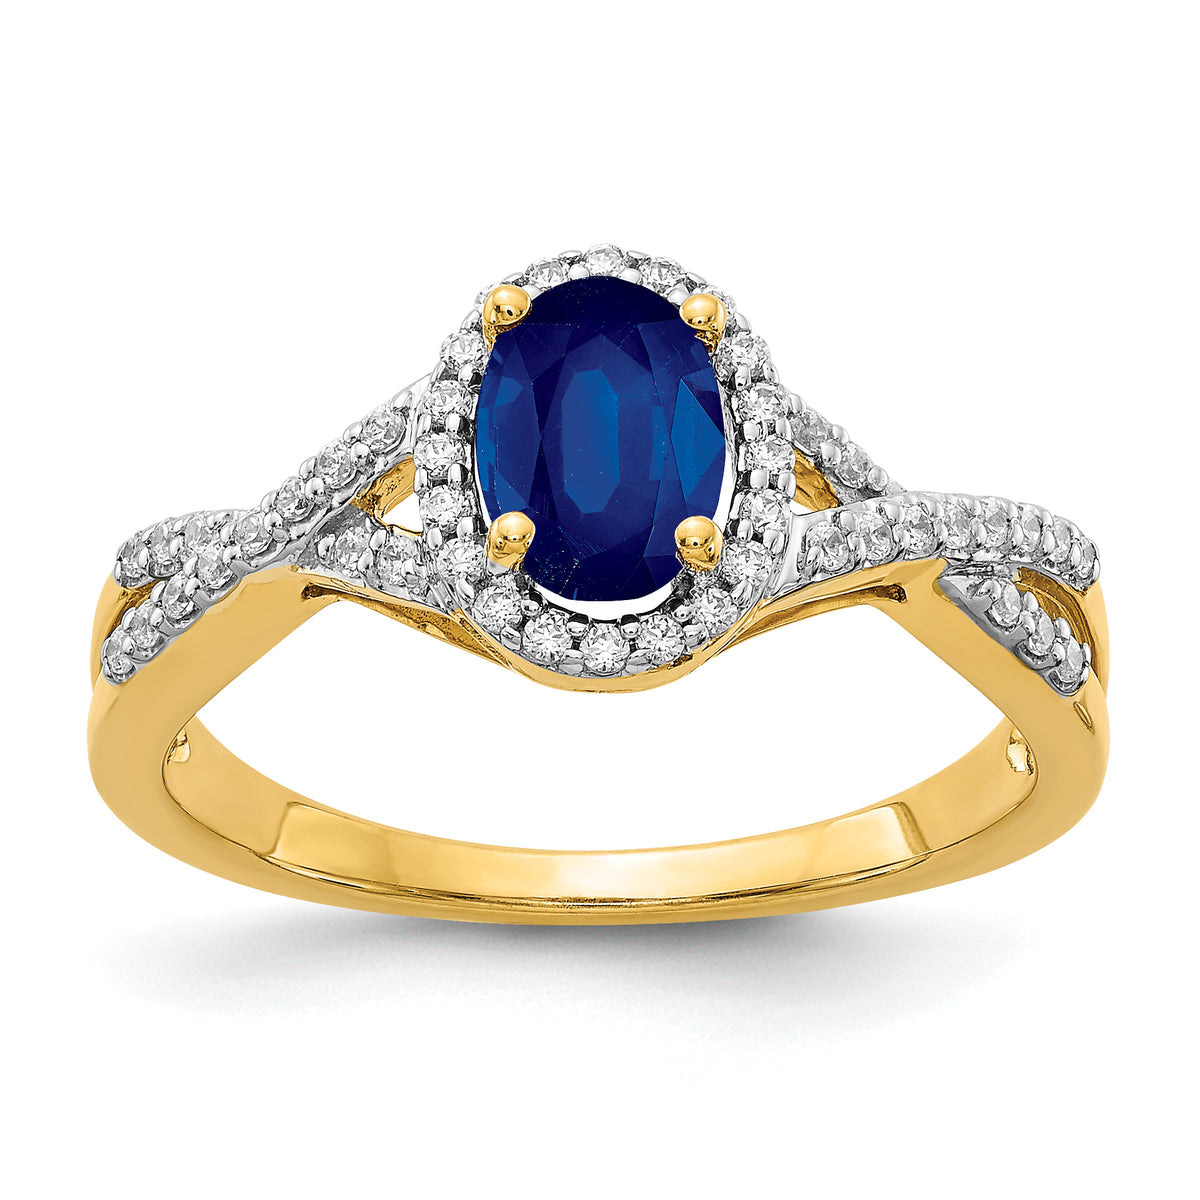 10k Diamond and Sapphire Oval Halo Ring